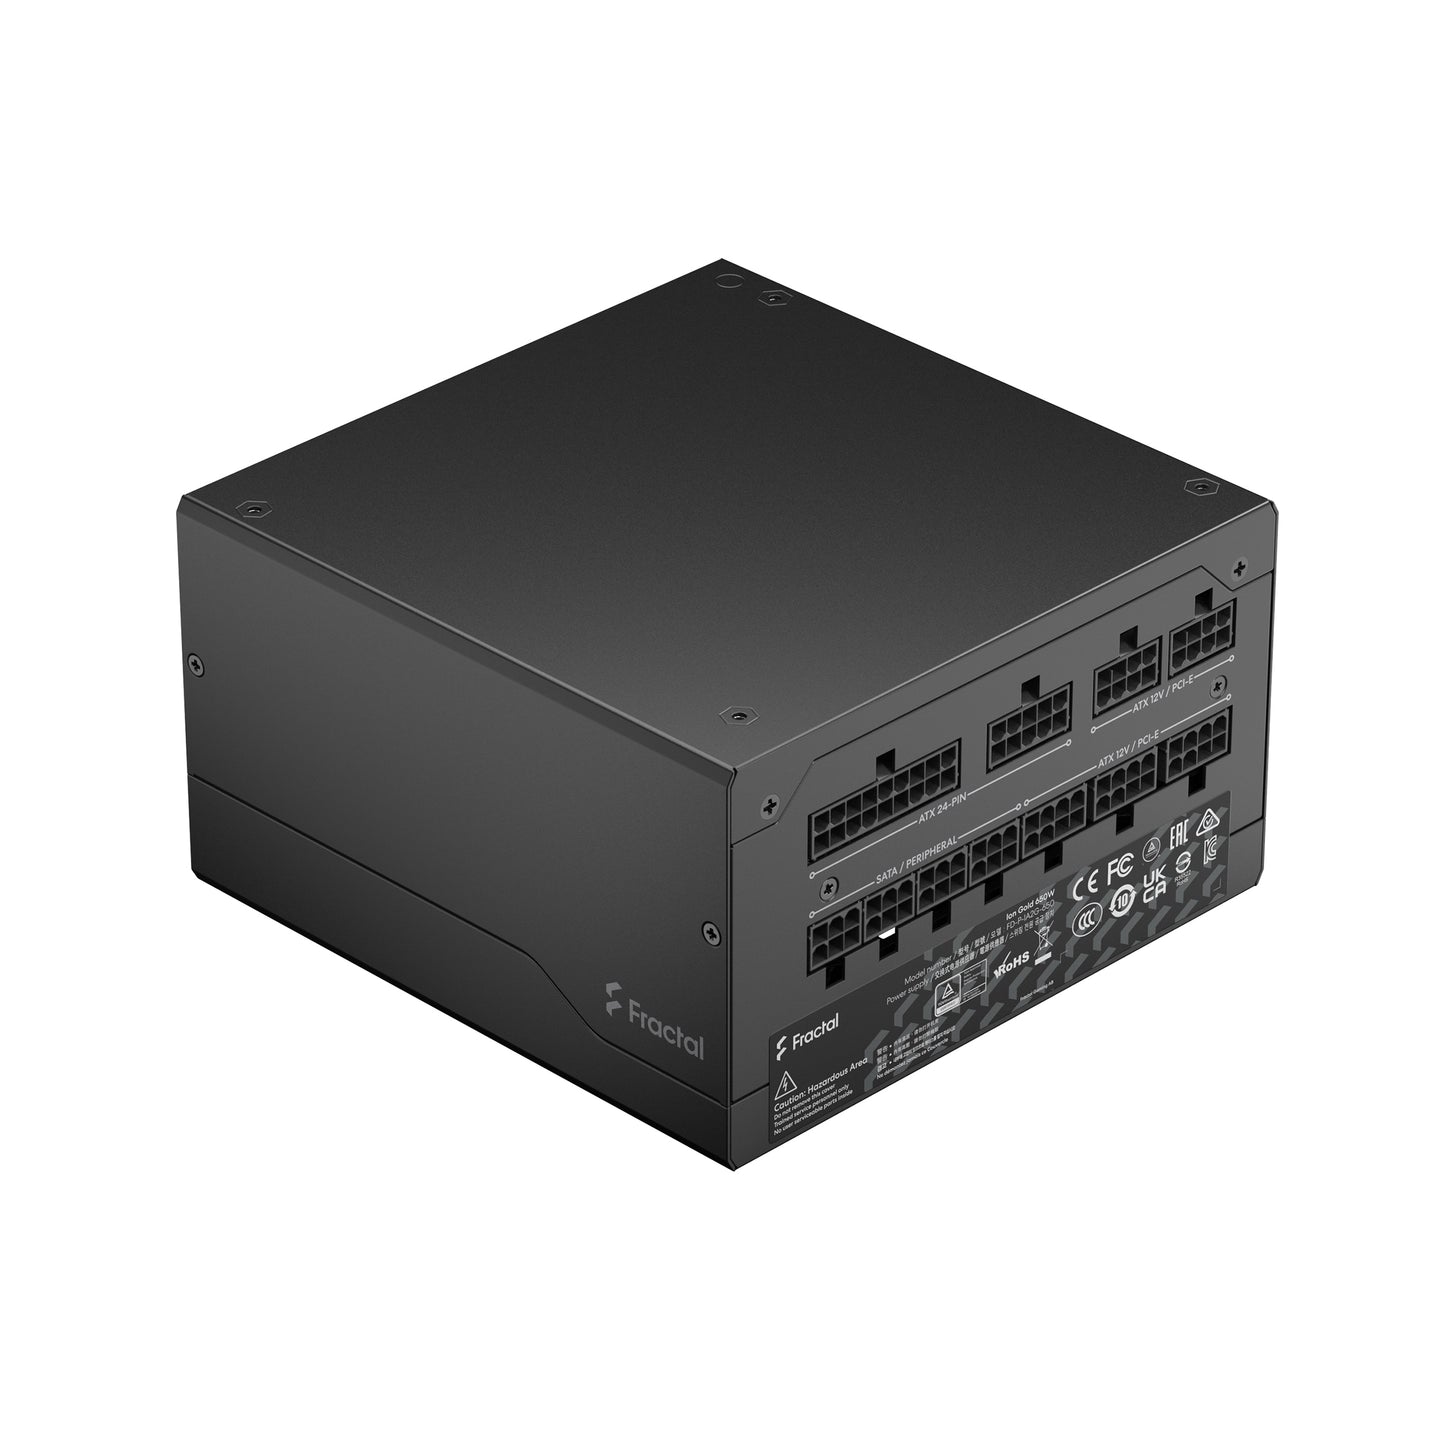 Fractal Design ION Gold 650W Fully Modular Power Supply, US Cord (FD-P-IA2G-650-US)